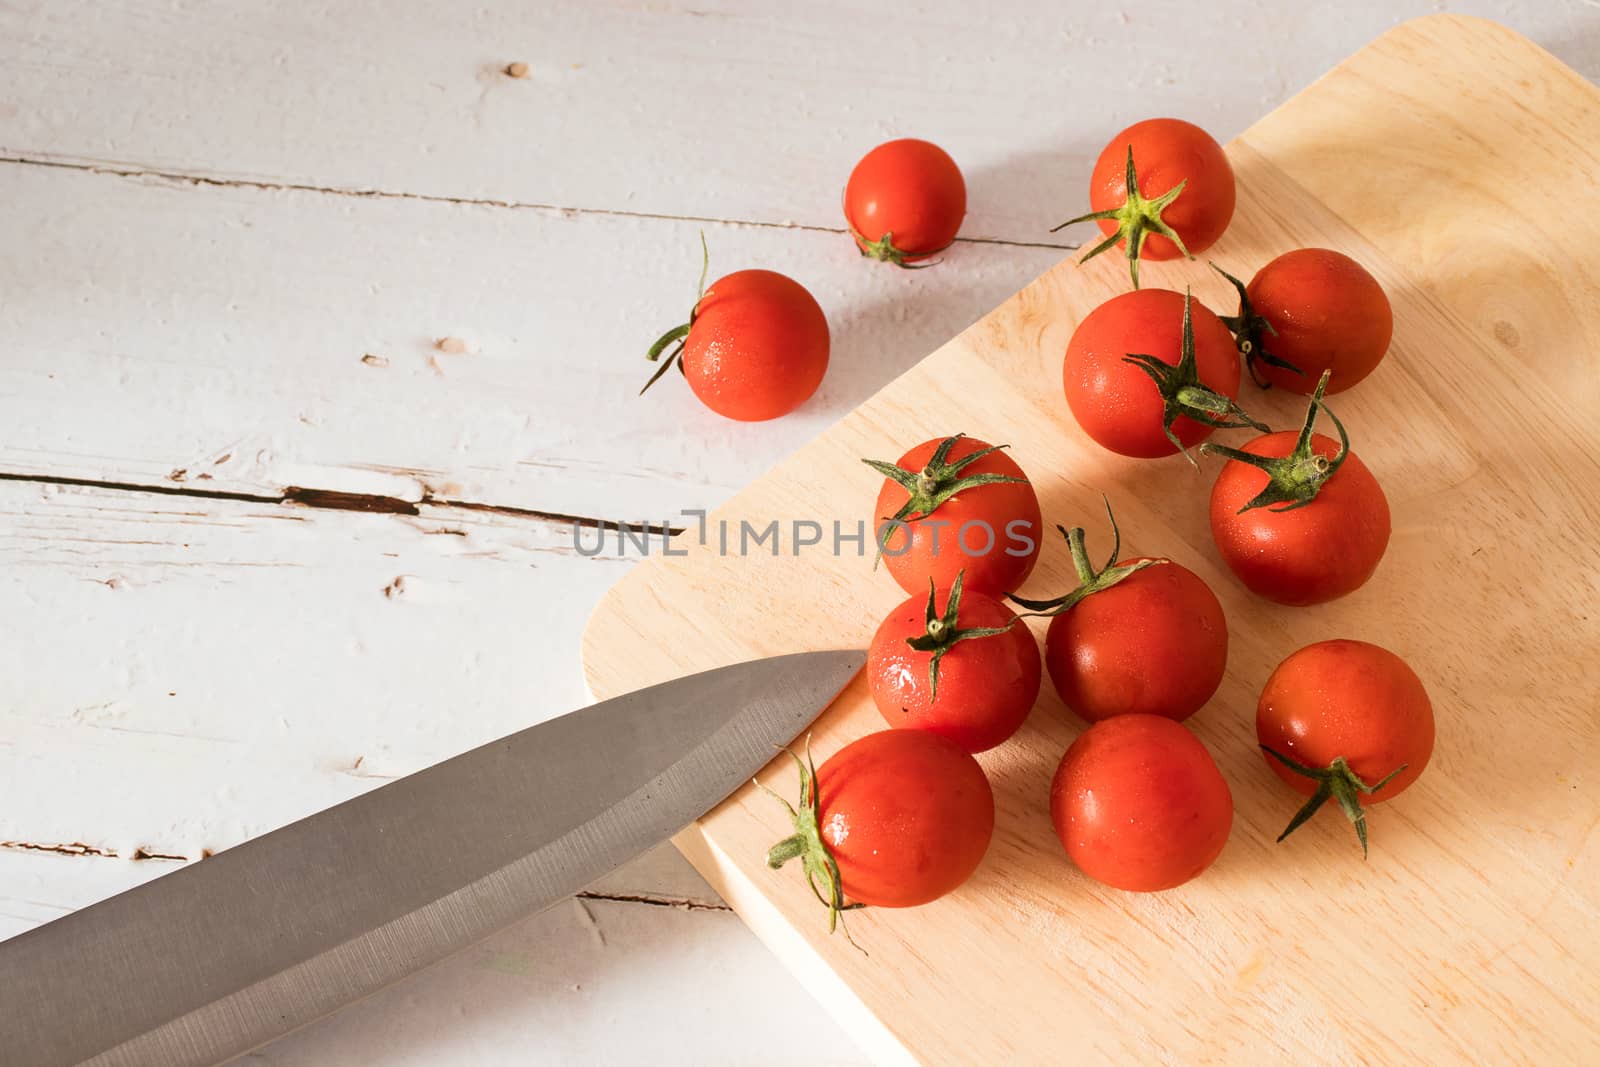 Red tomato on a cutting board wiht wooden background. by Khankeawsanan